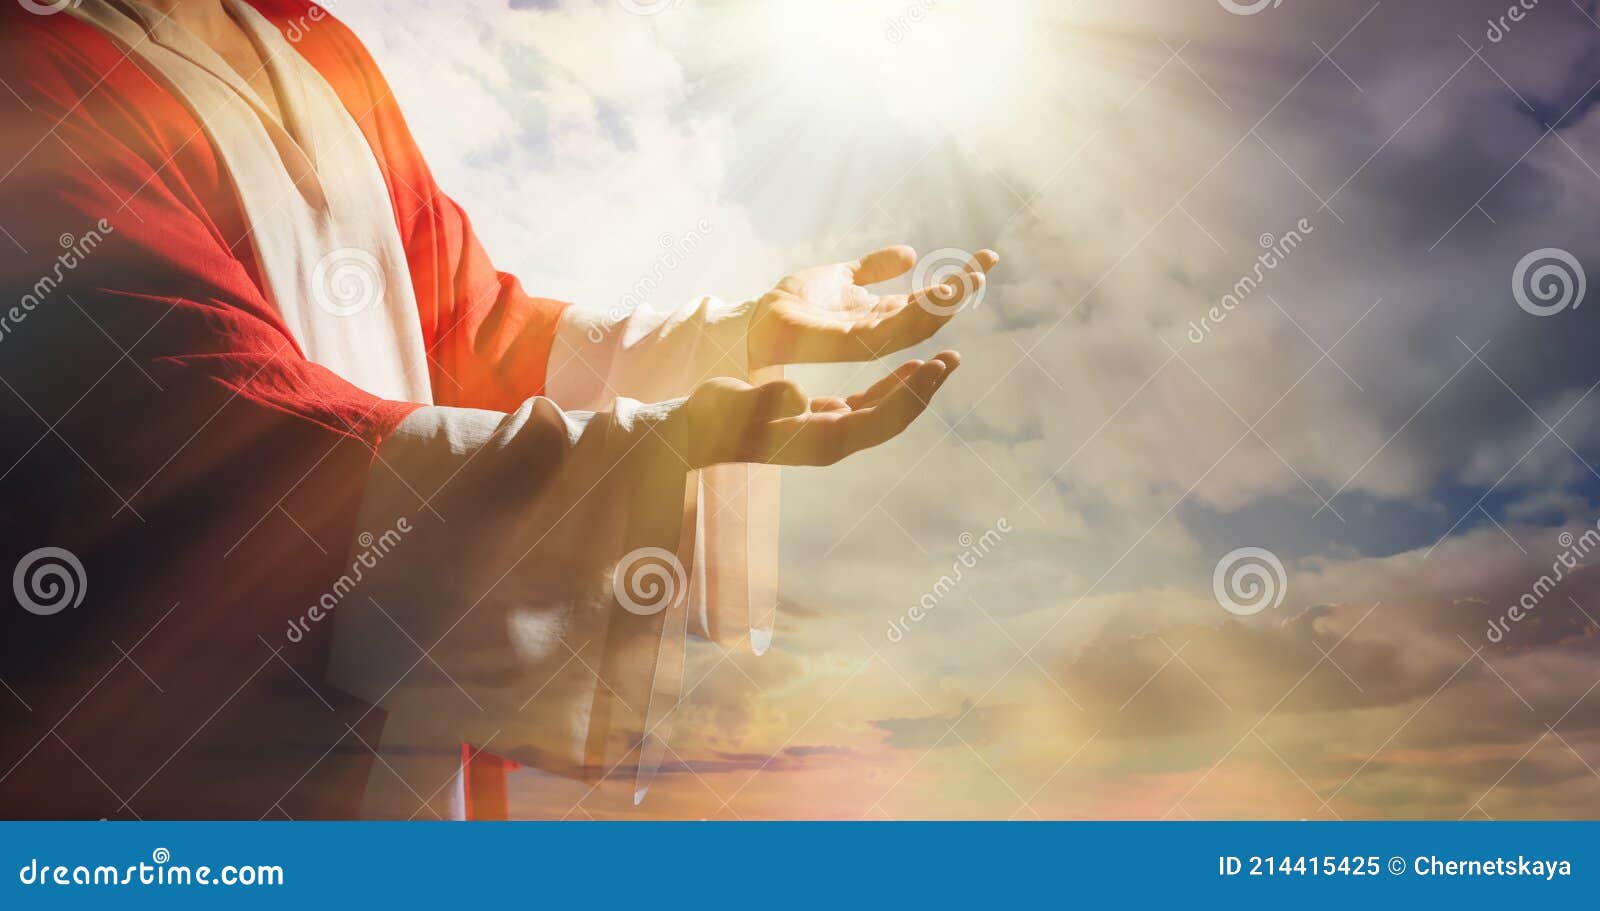 jesus christ reaching out his hands and praying at sunset, banner 